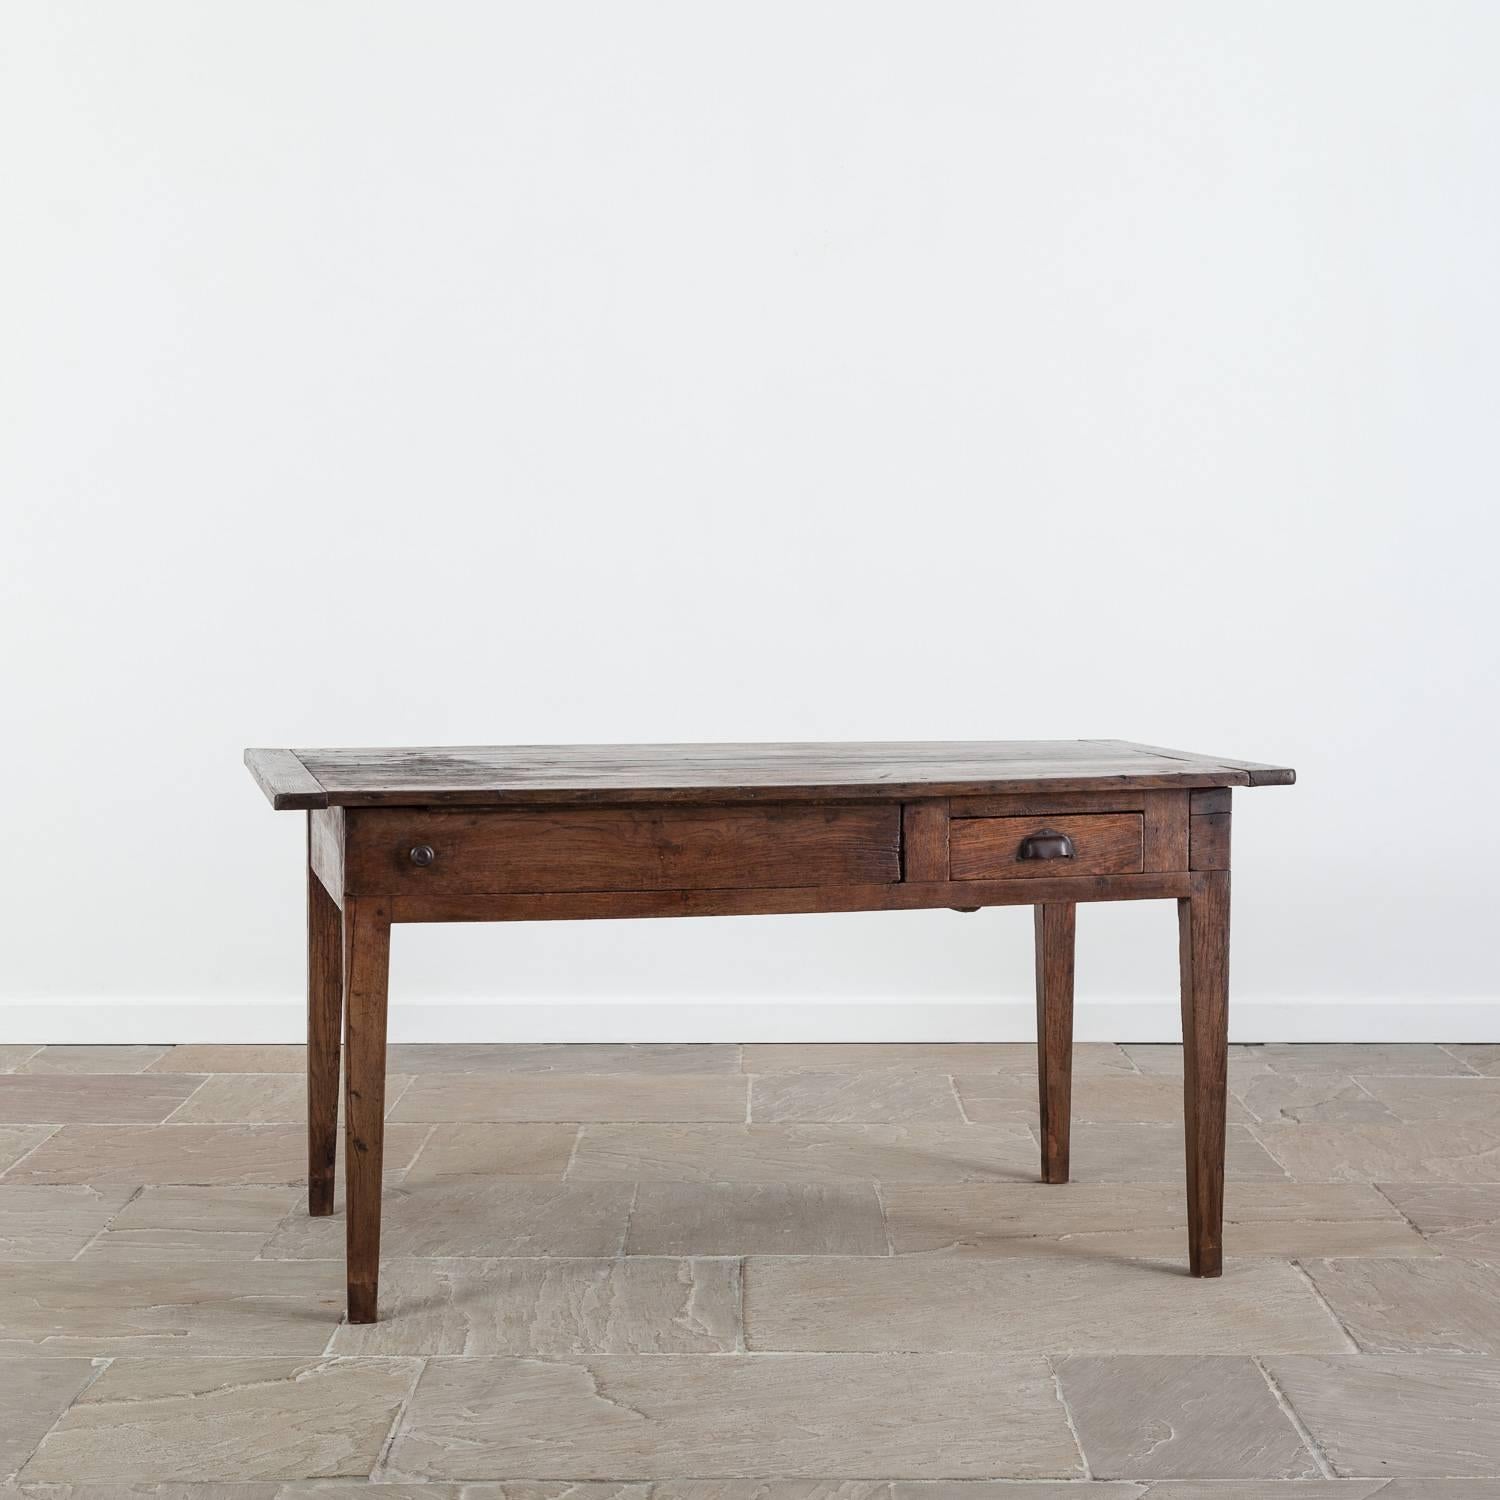 19th Century French Chestnut Table In Fair Condition For Sale In York, GB